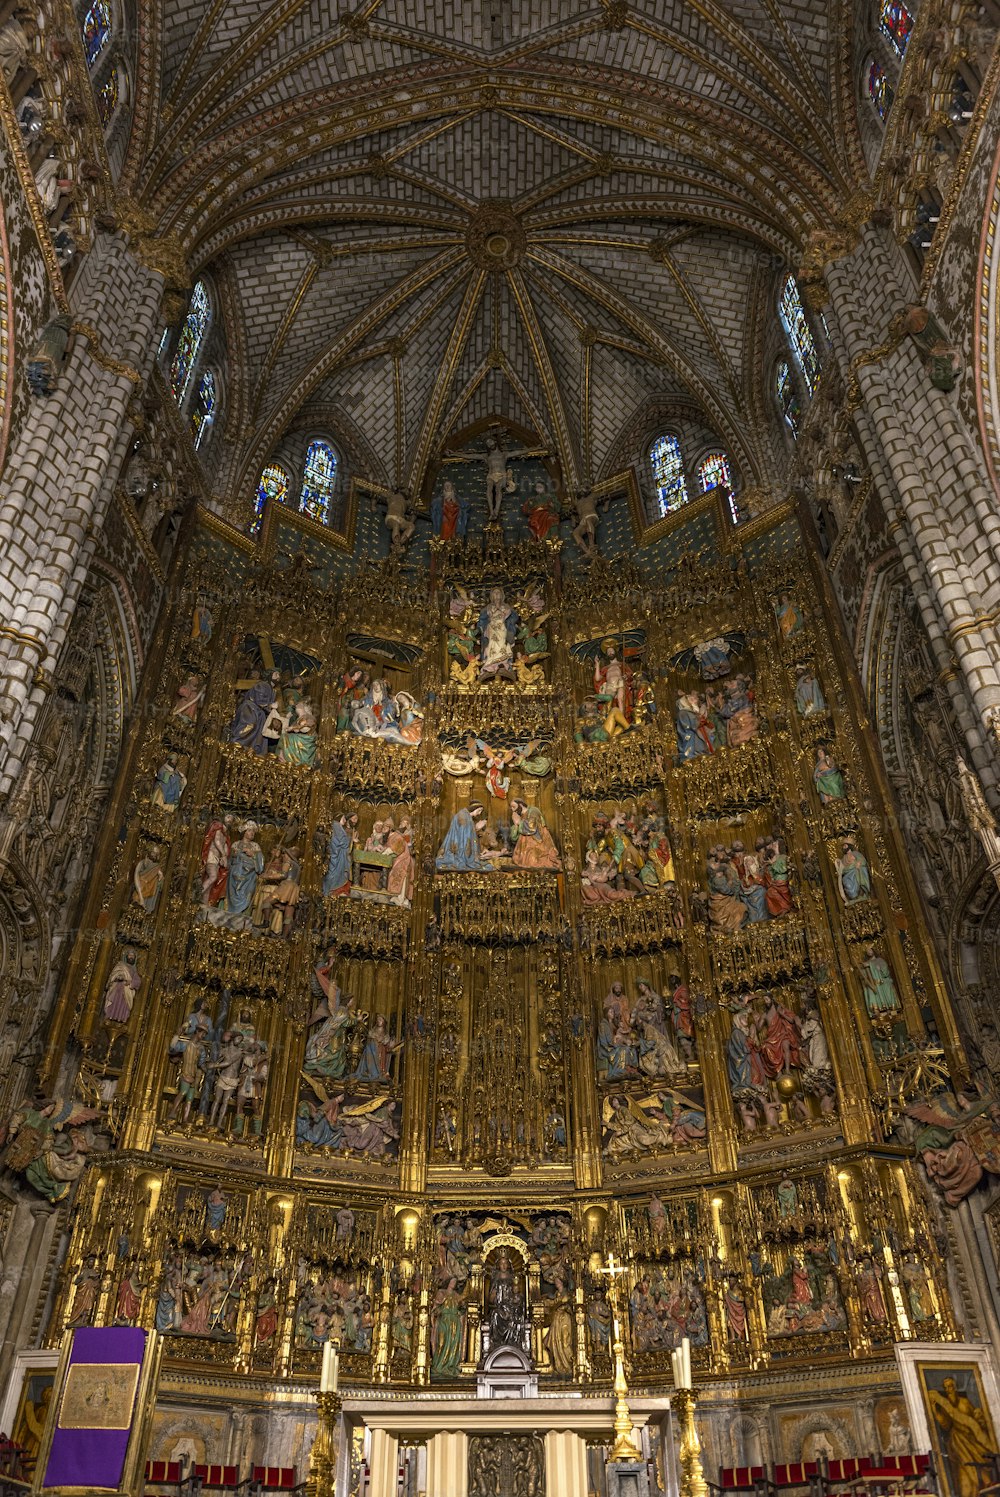 Inside view of the retable and High Altar of the Cathedral of Toledo (Primate Cathedral of Saint Mary of Toledo), an extremely florid Gothic altarpiece and one of the last examples of this artistic style. The cathedral of Toledo is one of the three 13th-century High Gothic cathedrals in Spain and is considered to be the magnum opus of the Gothic style in Spain.